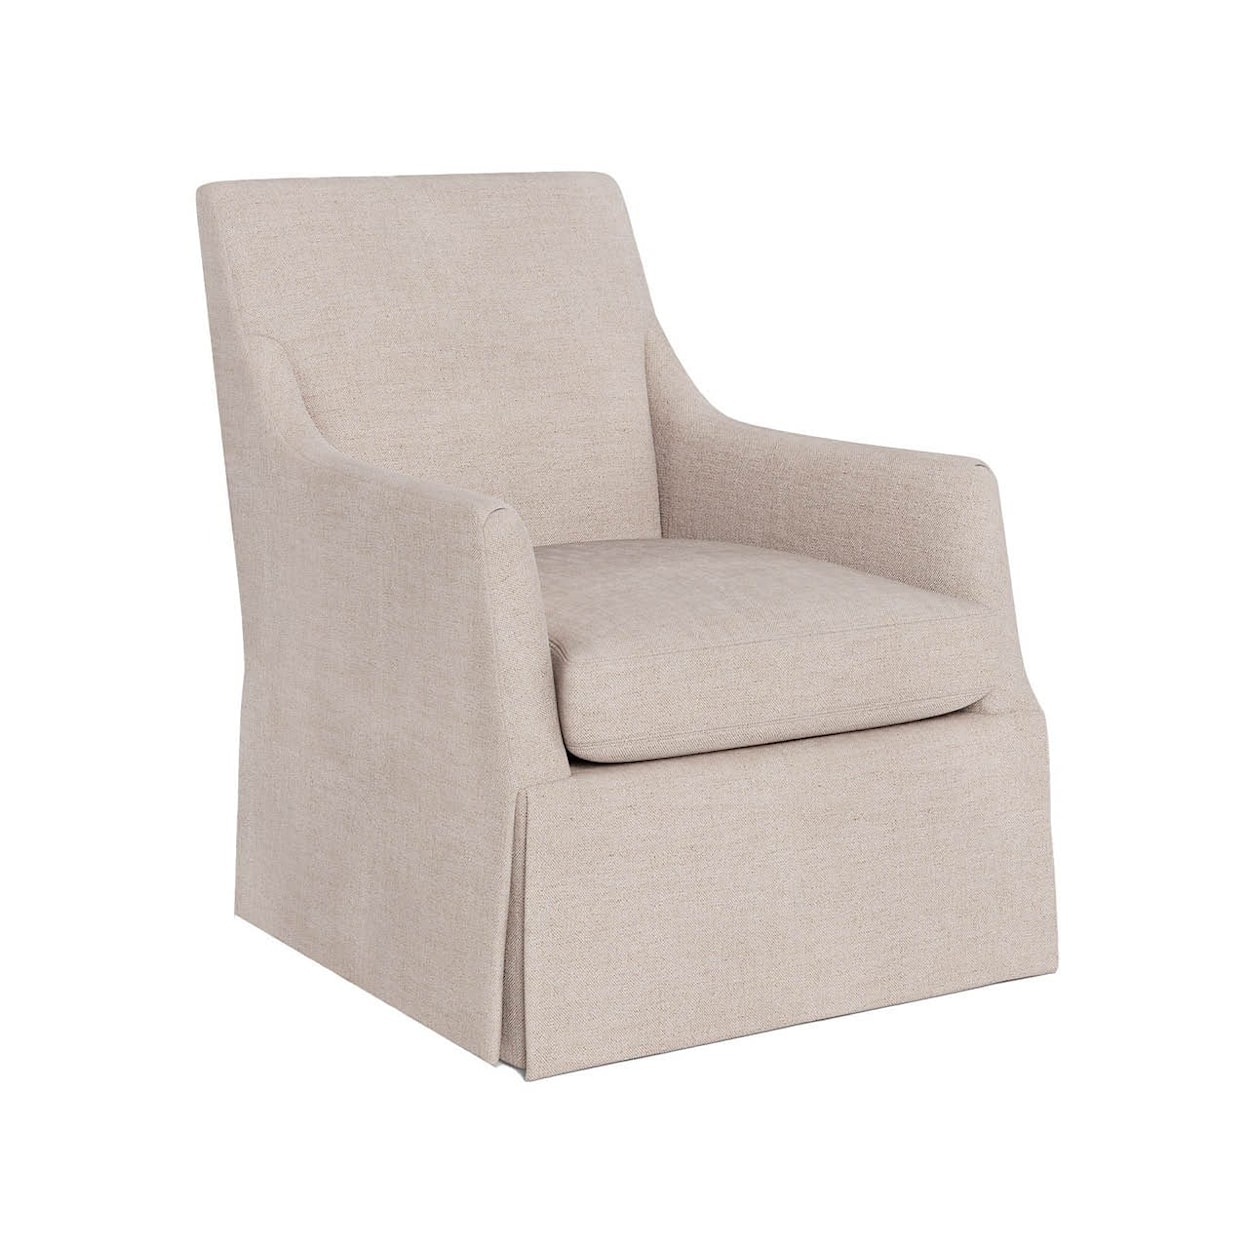 Universal Special Order Anniston Swivel Chair